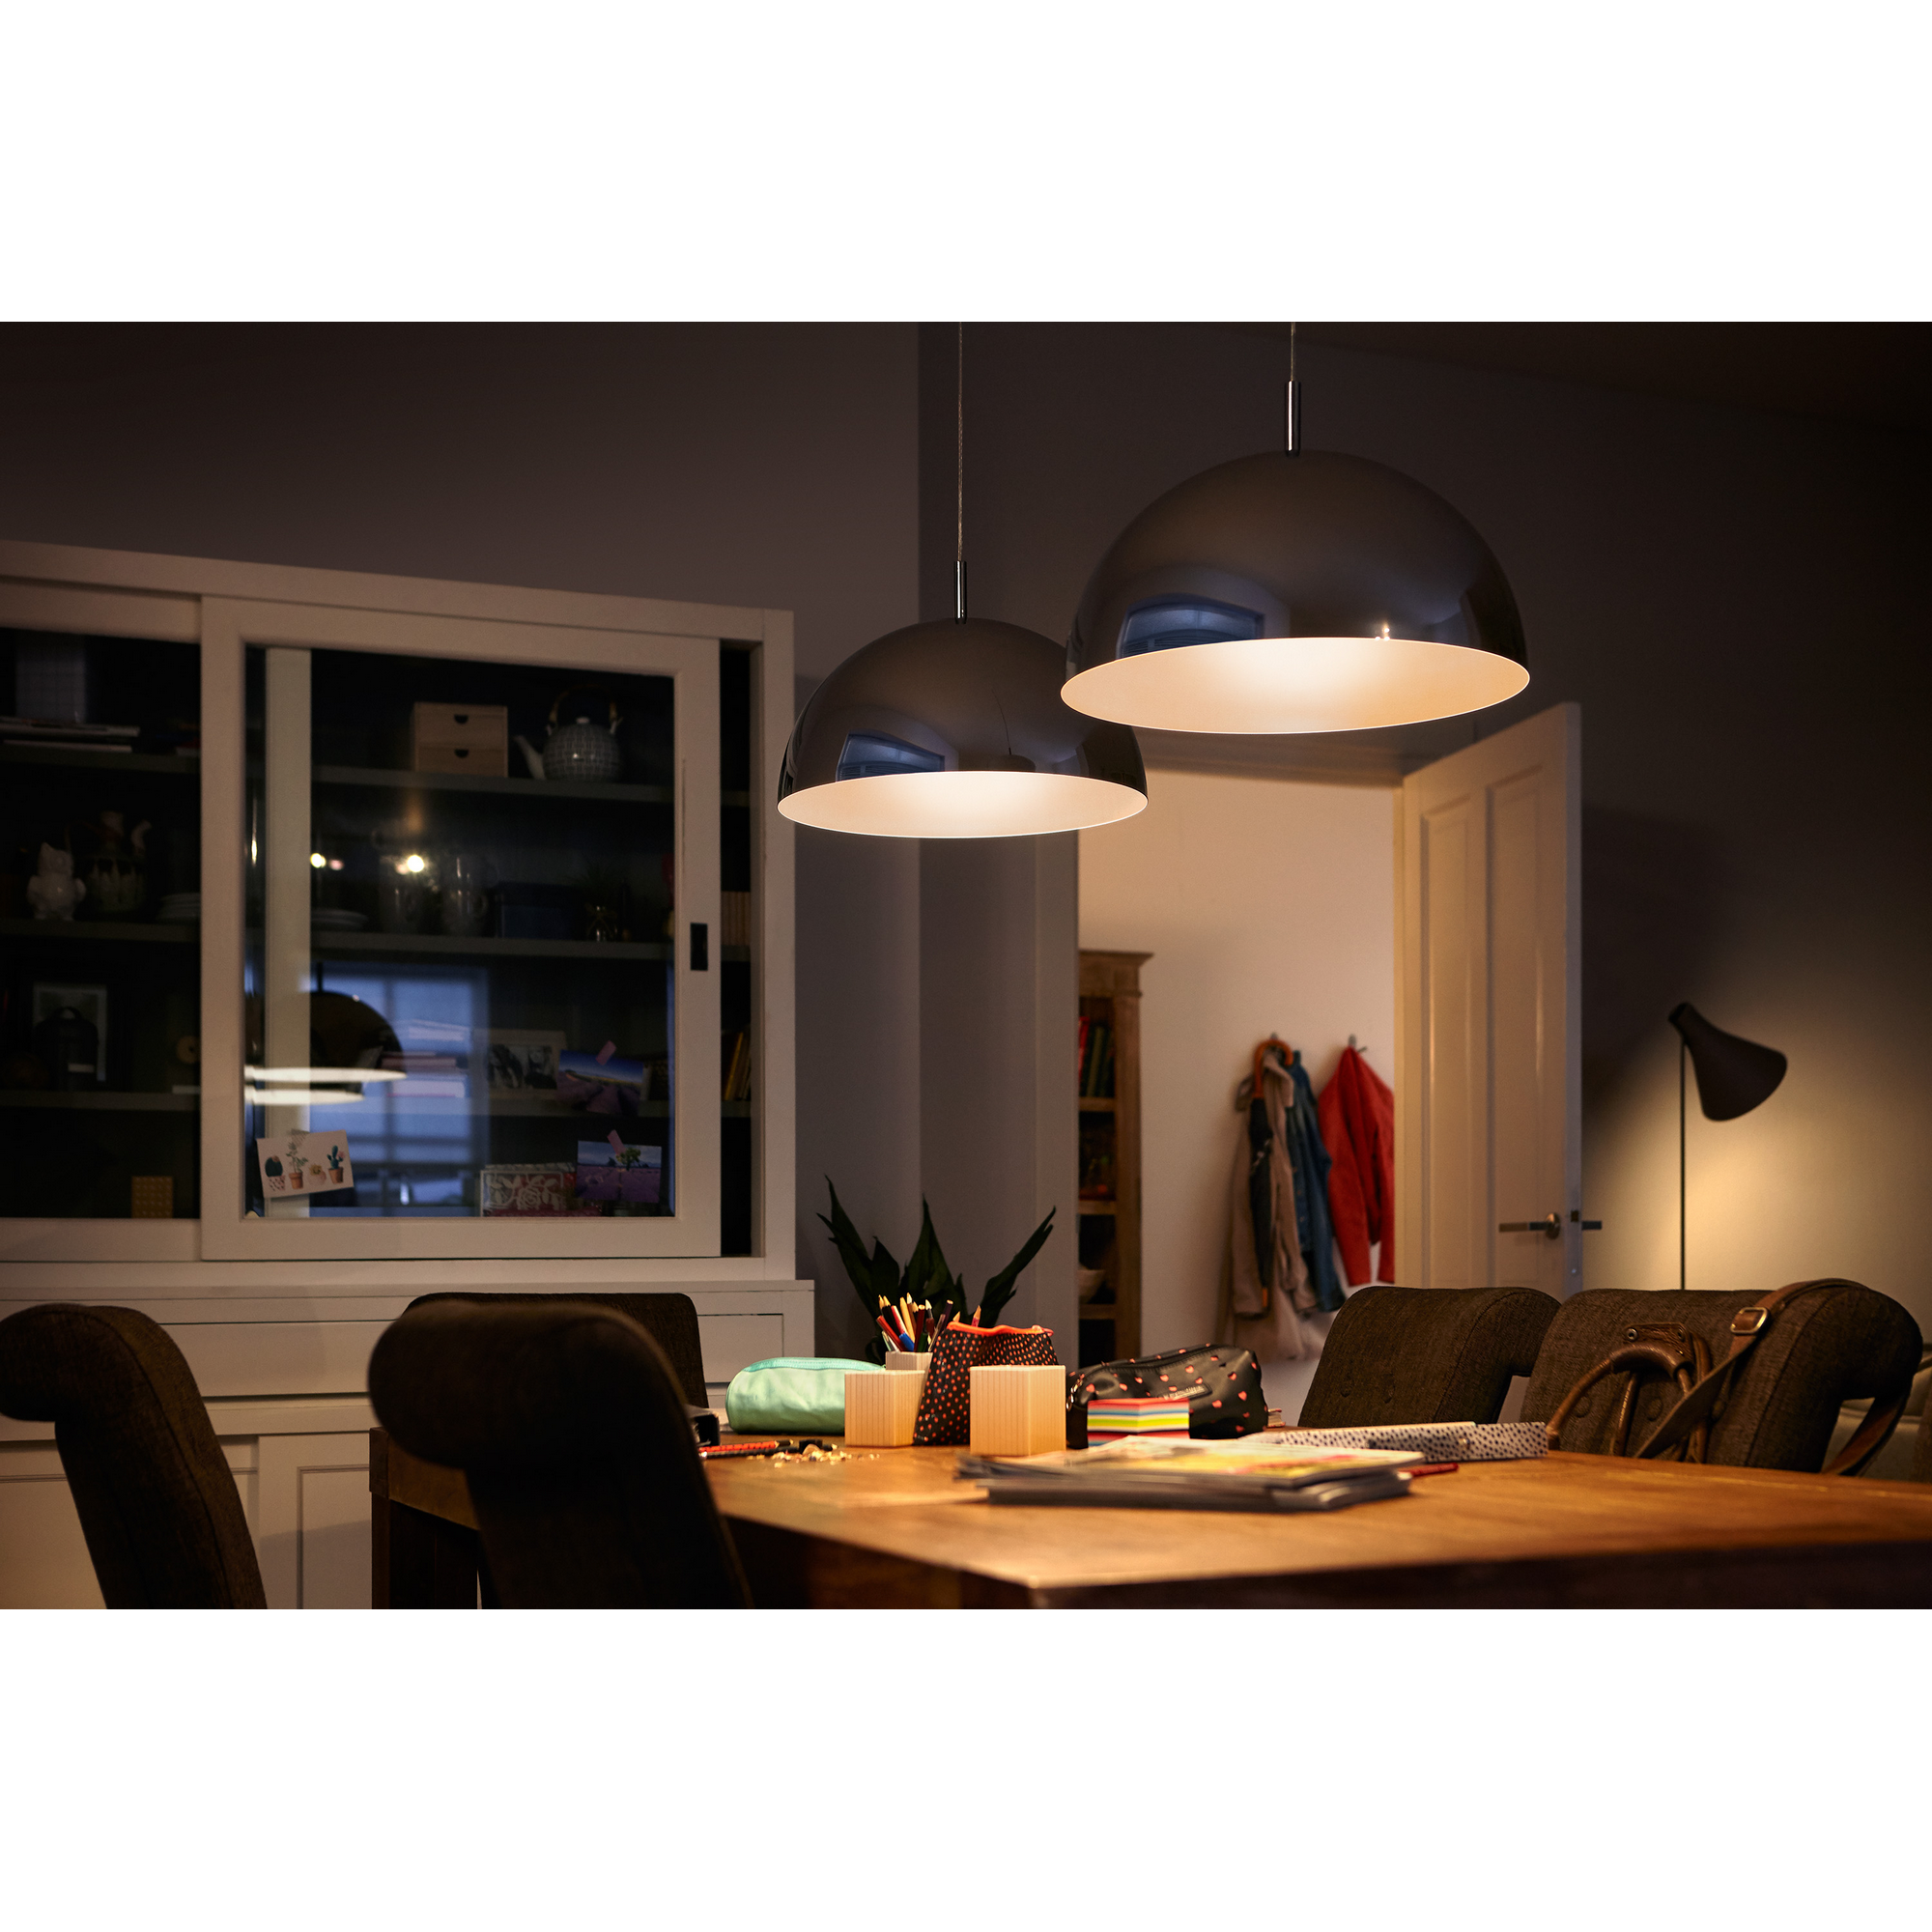 LED-Lampe 'Classic' E27 7 W + product picture